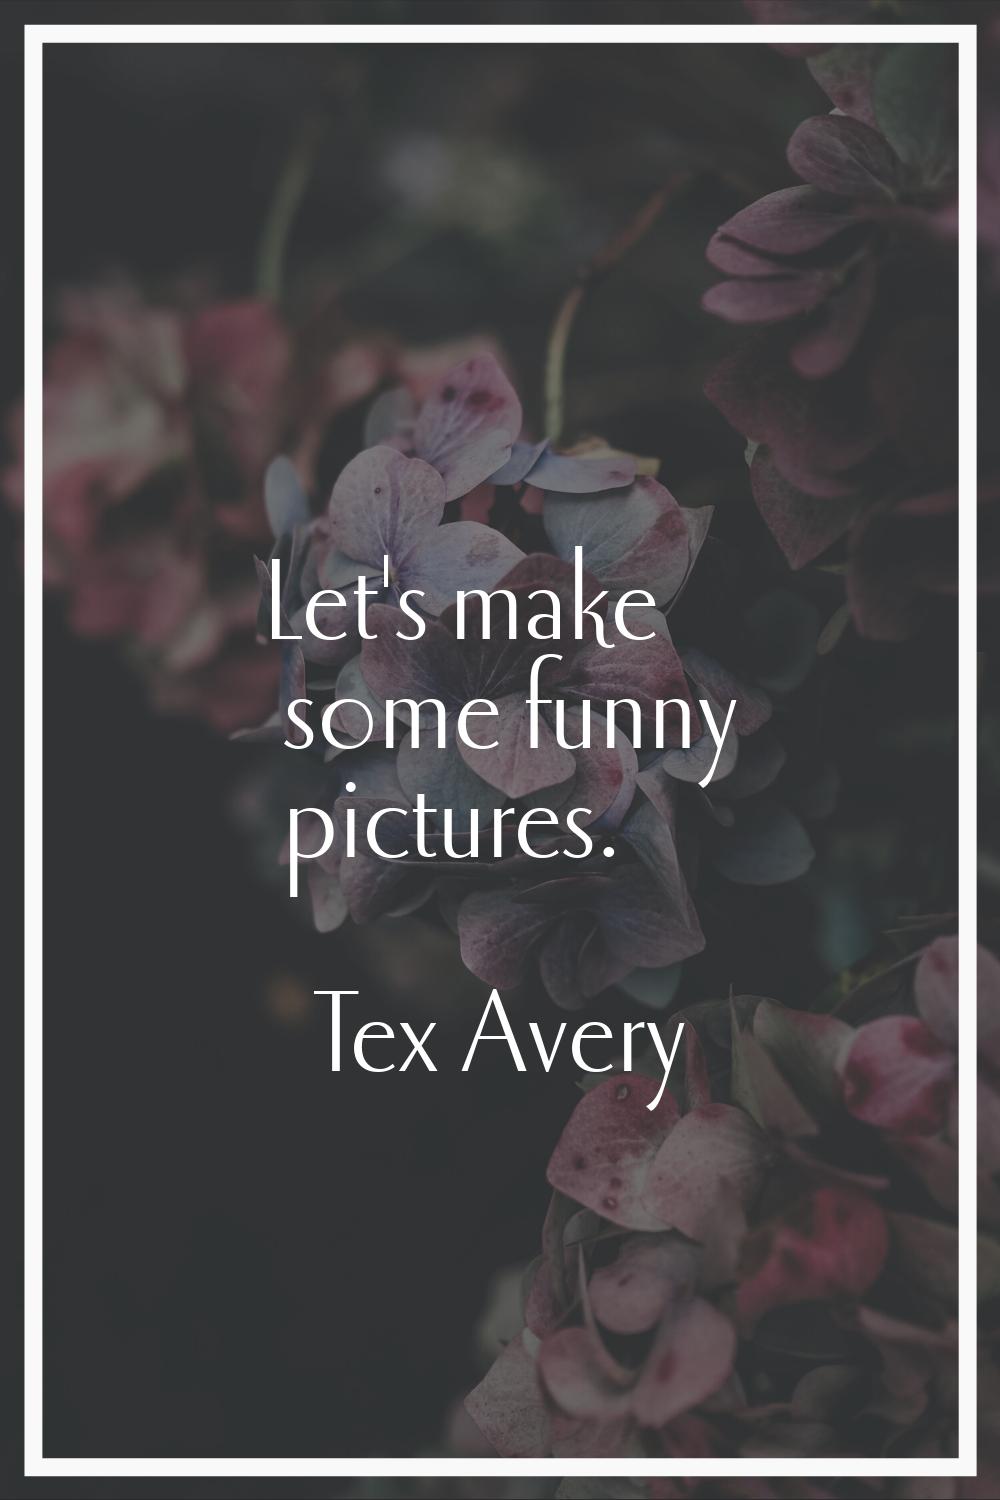 Let's make some funny pictures.